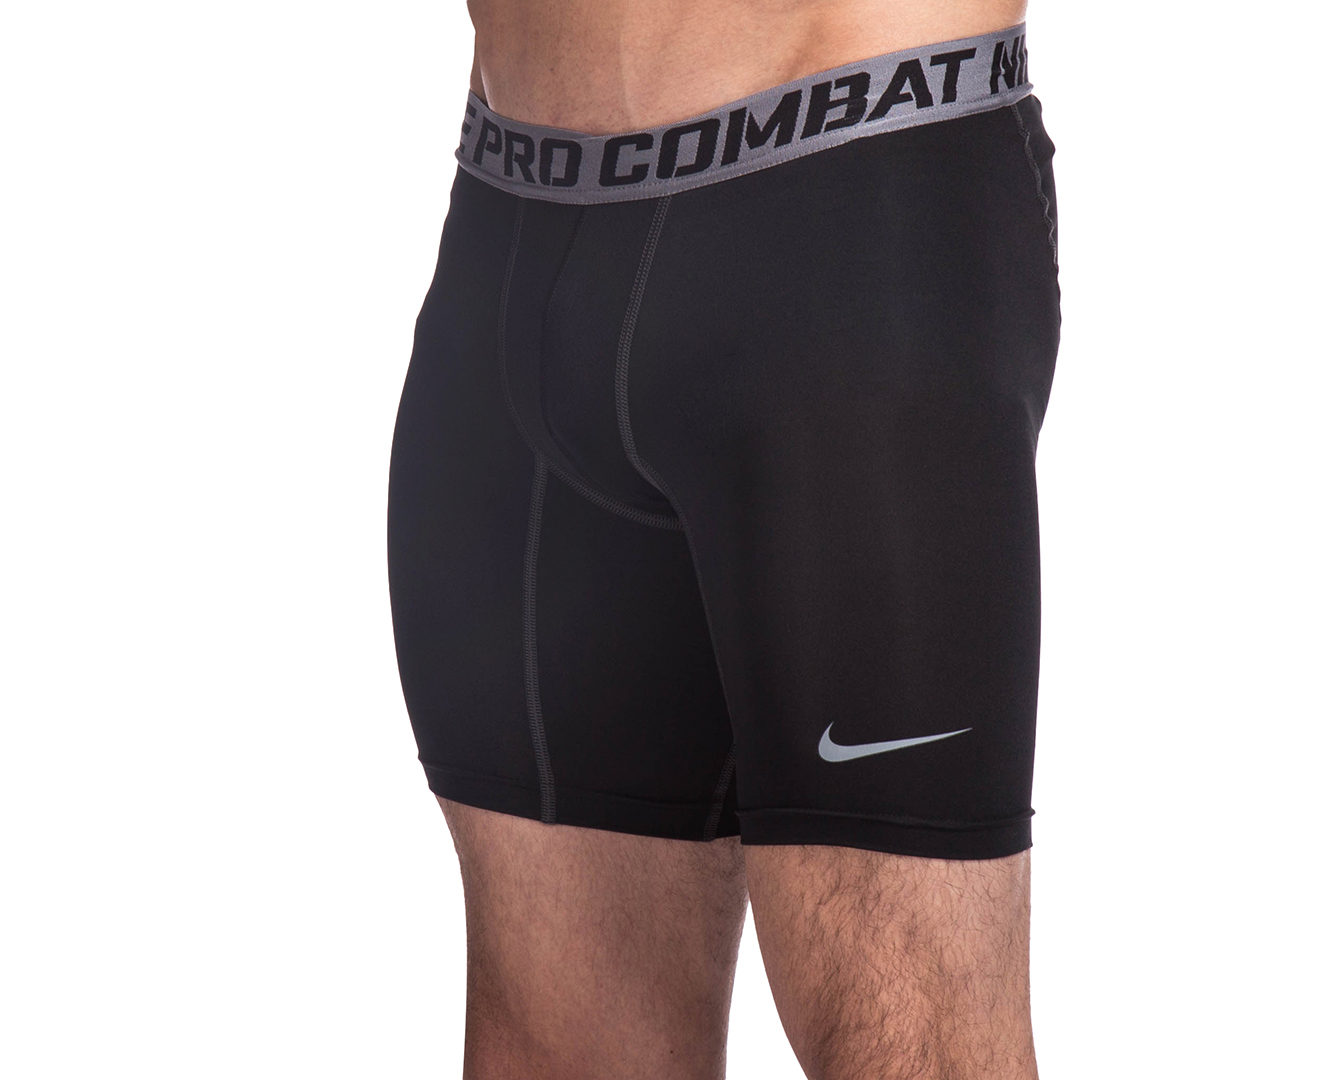 nike pro combat compression shorts with cup pocket - OFF-66% >Free Delivery